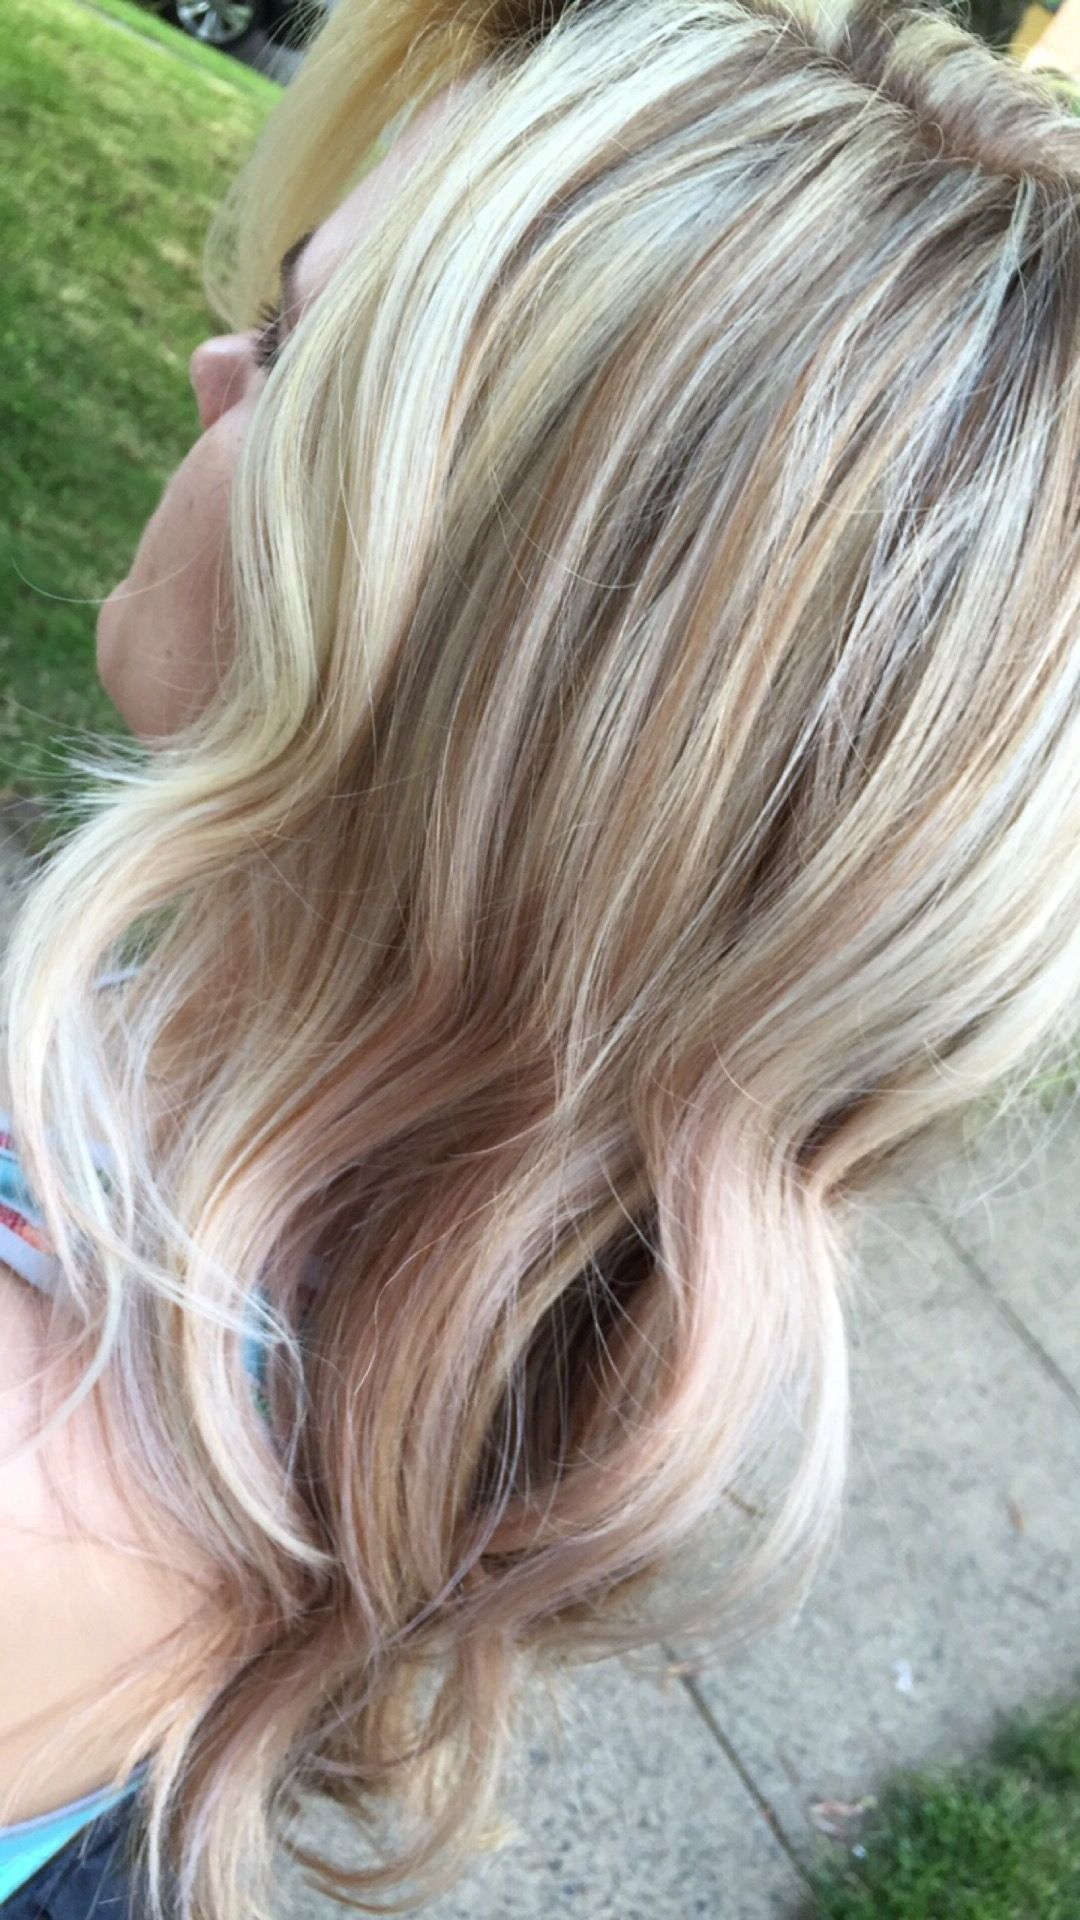 Most Recently Released Dishwater Blonde Hairstyles With Face Frame Throughout Platinum Face Framing Highlights With Blonde / Rose Gold Hues (View 14 of 20)